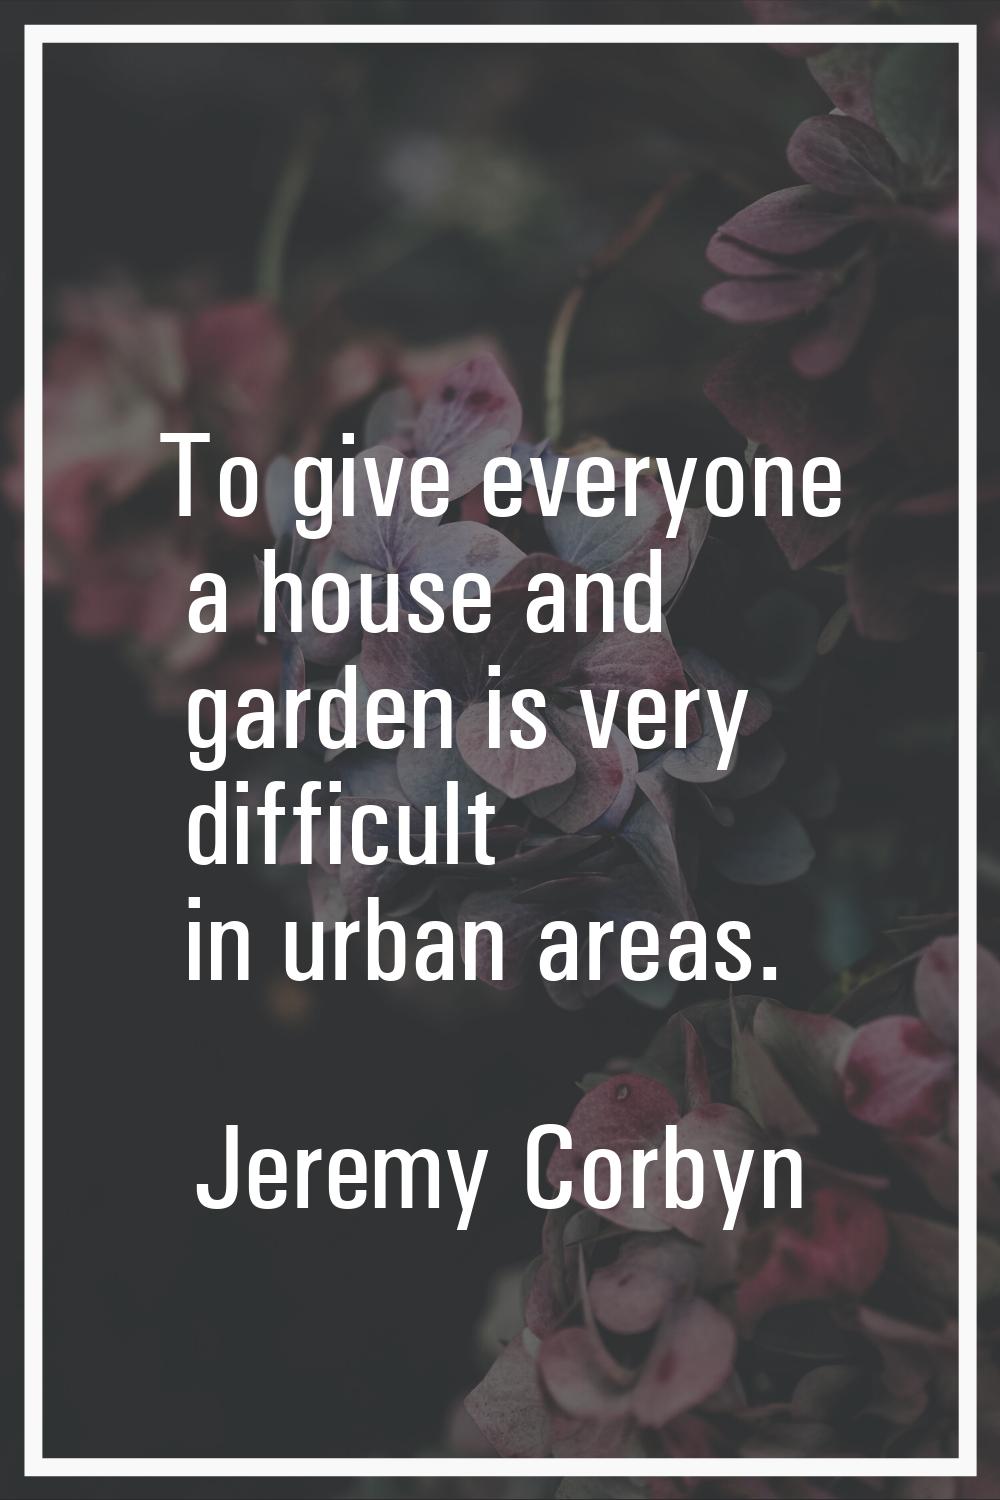 To give everyone a house and garden is very difficult in urban areas.